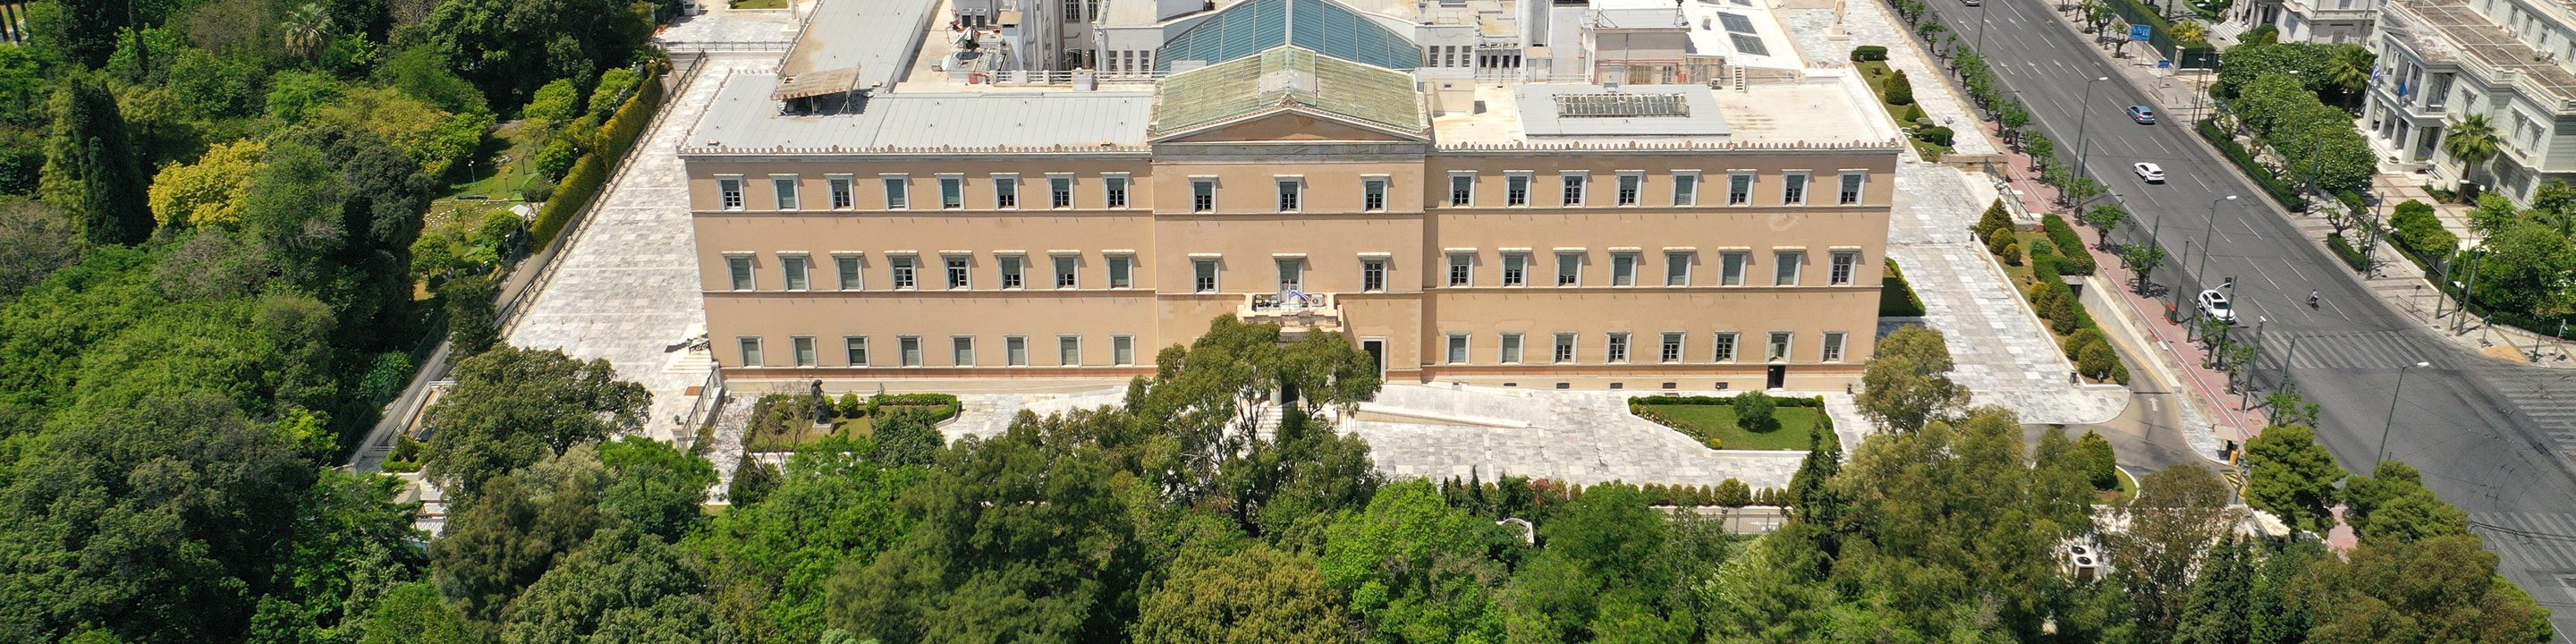 Hellenic Parliament in Athens